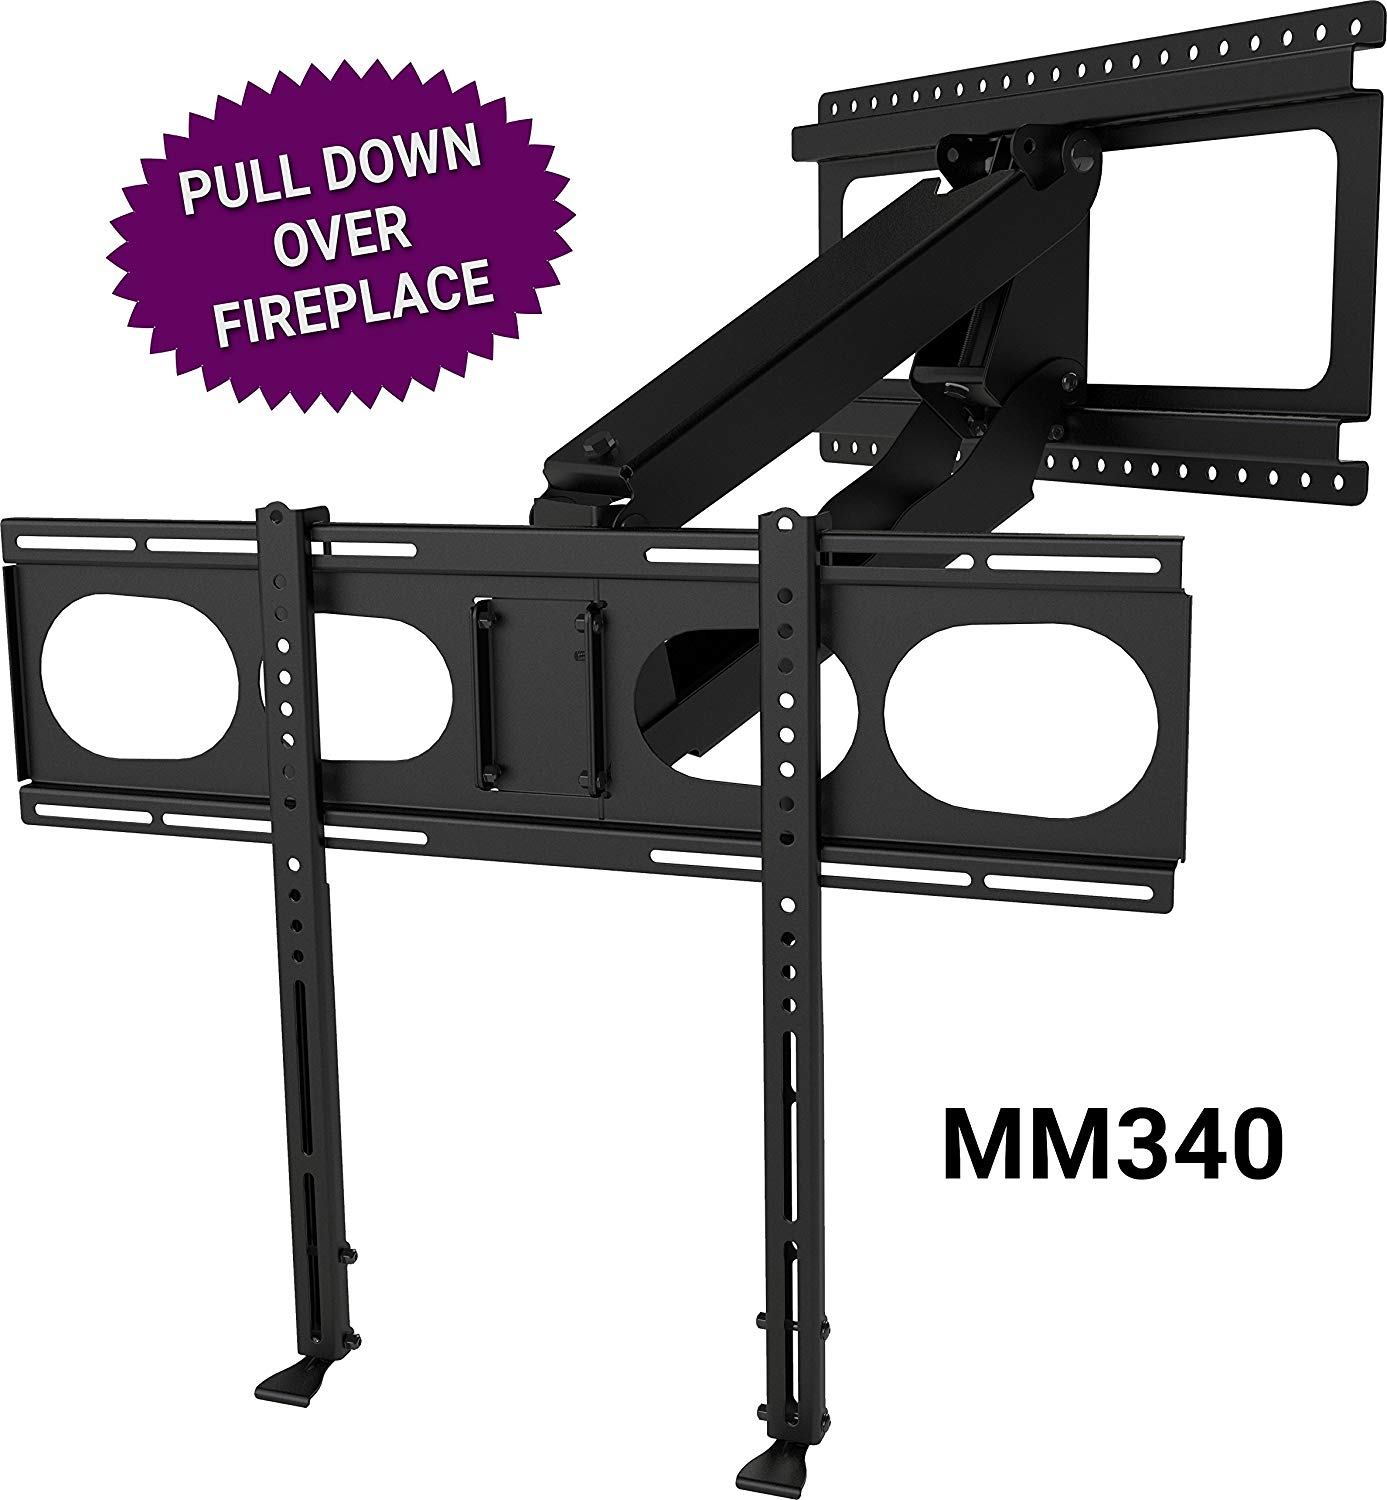 Fireplace Mantel Height with Tv Above New Mantelmount Mm340 Fireplace Pull Down Tv Mount